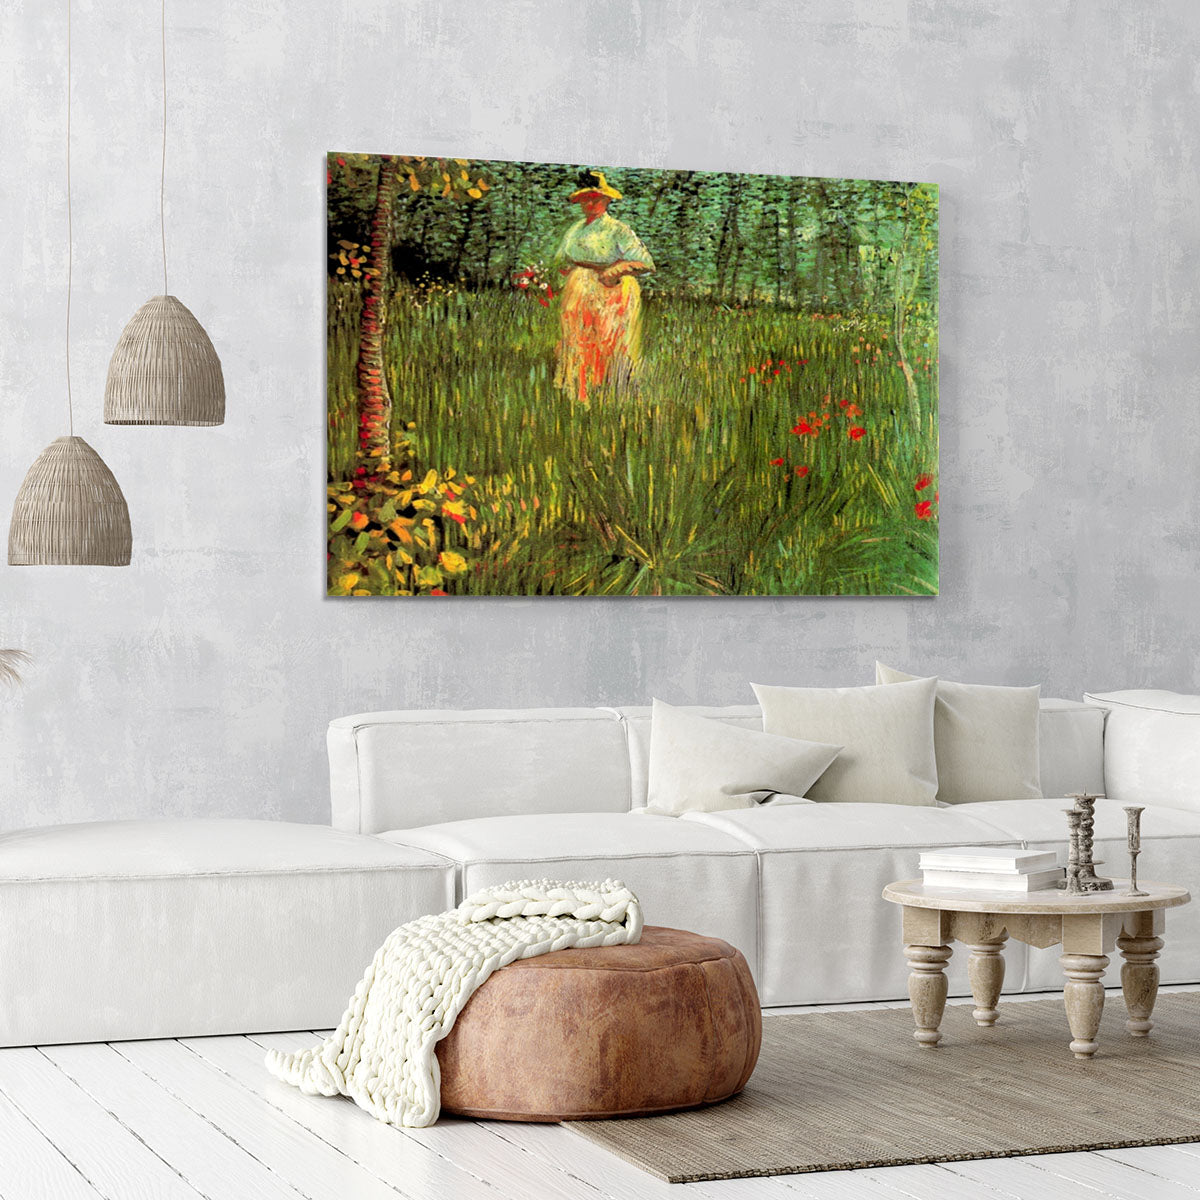 A Woman Walking in a Garden by Van Gogh Canvas Print or Poster - Canvas Art Rocks - 6